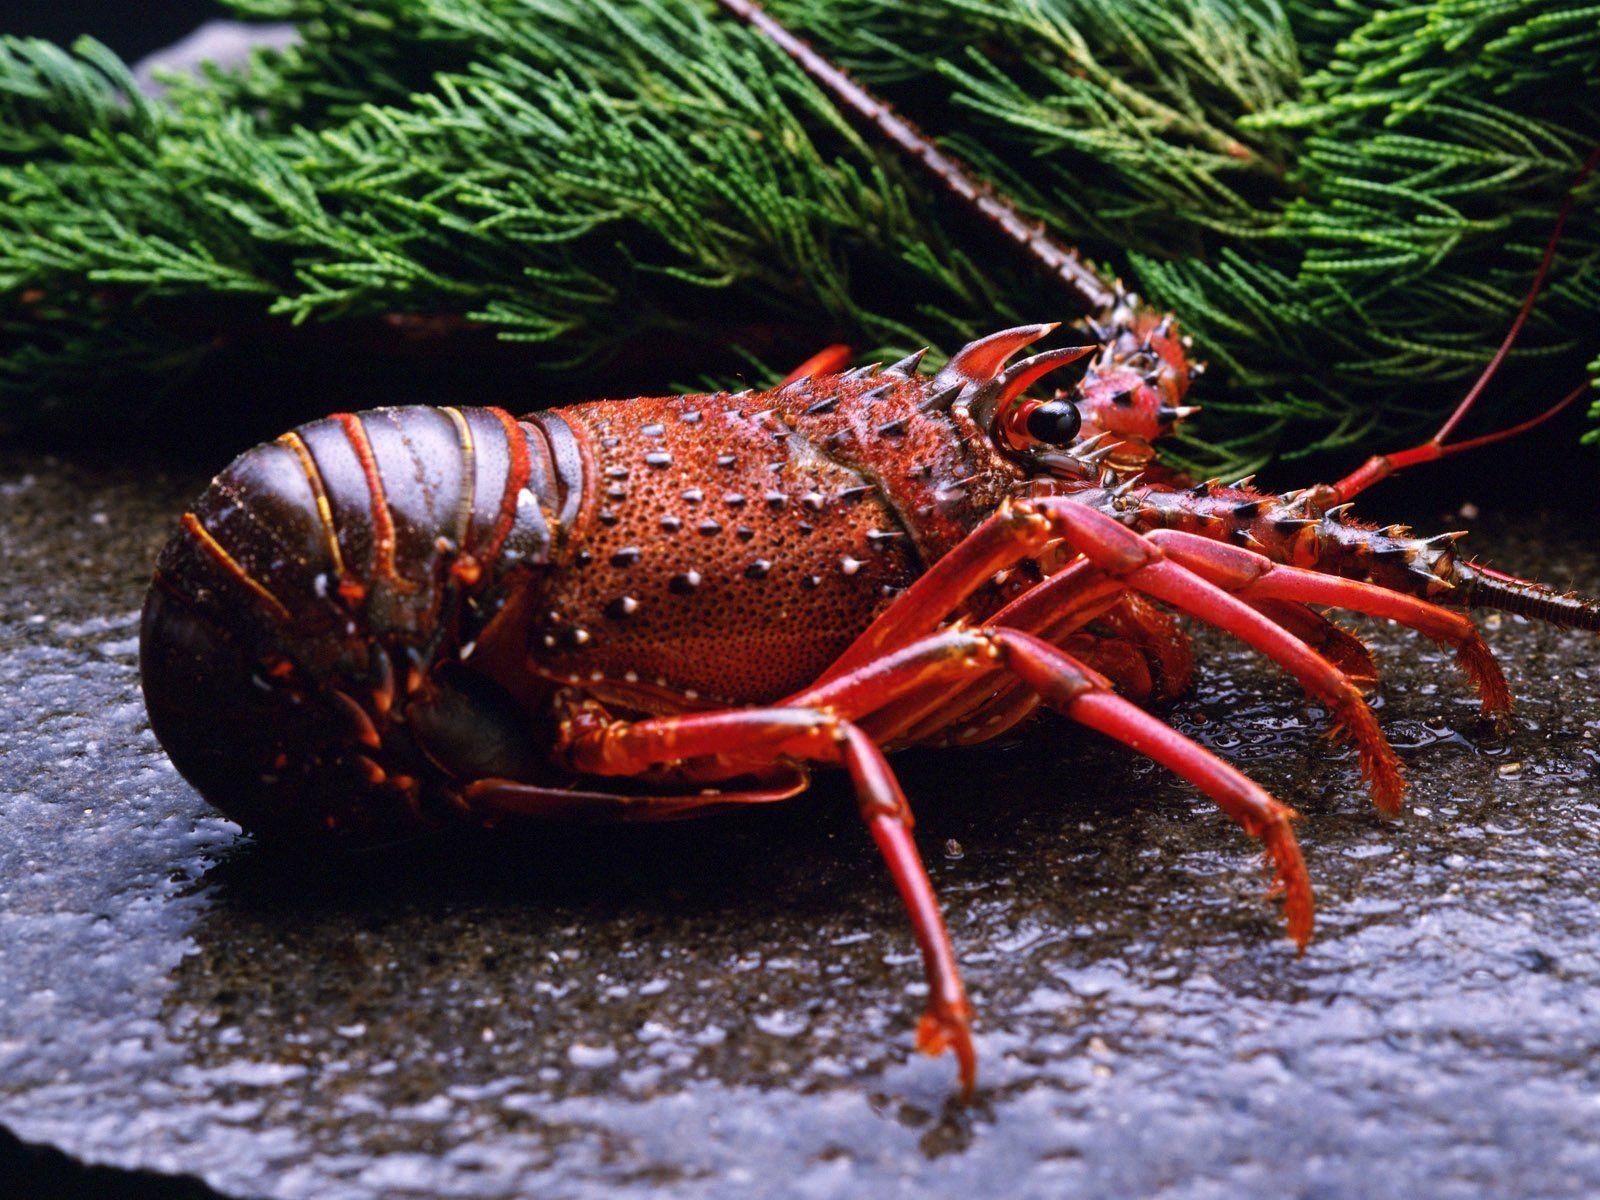 Lobster HD Wallpaper and Background Image